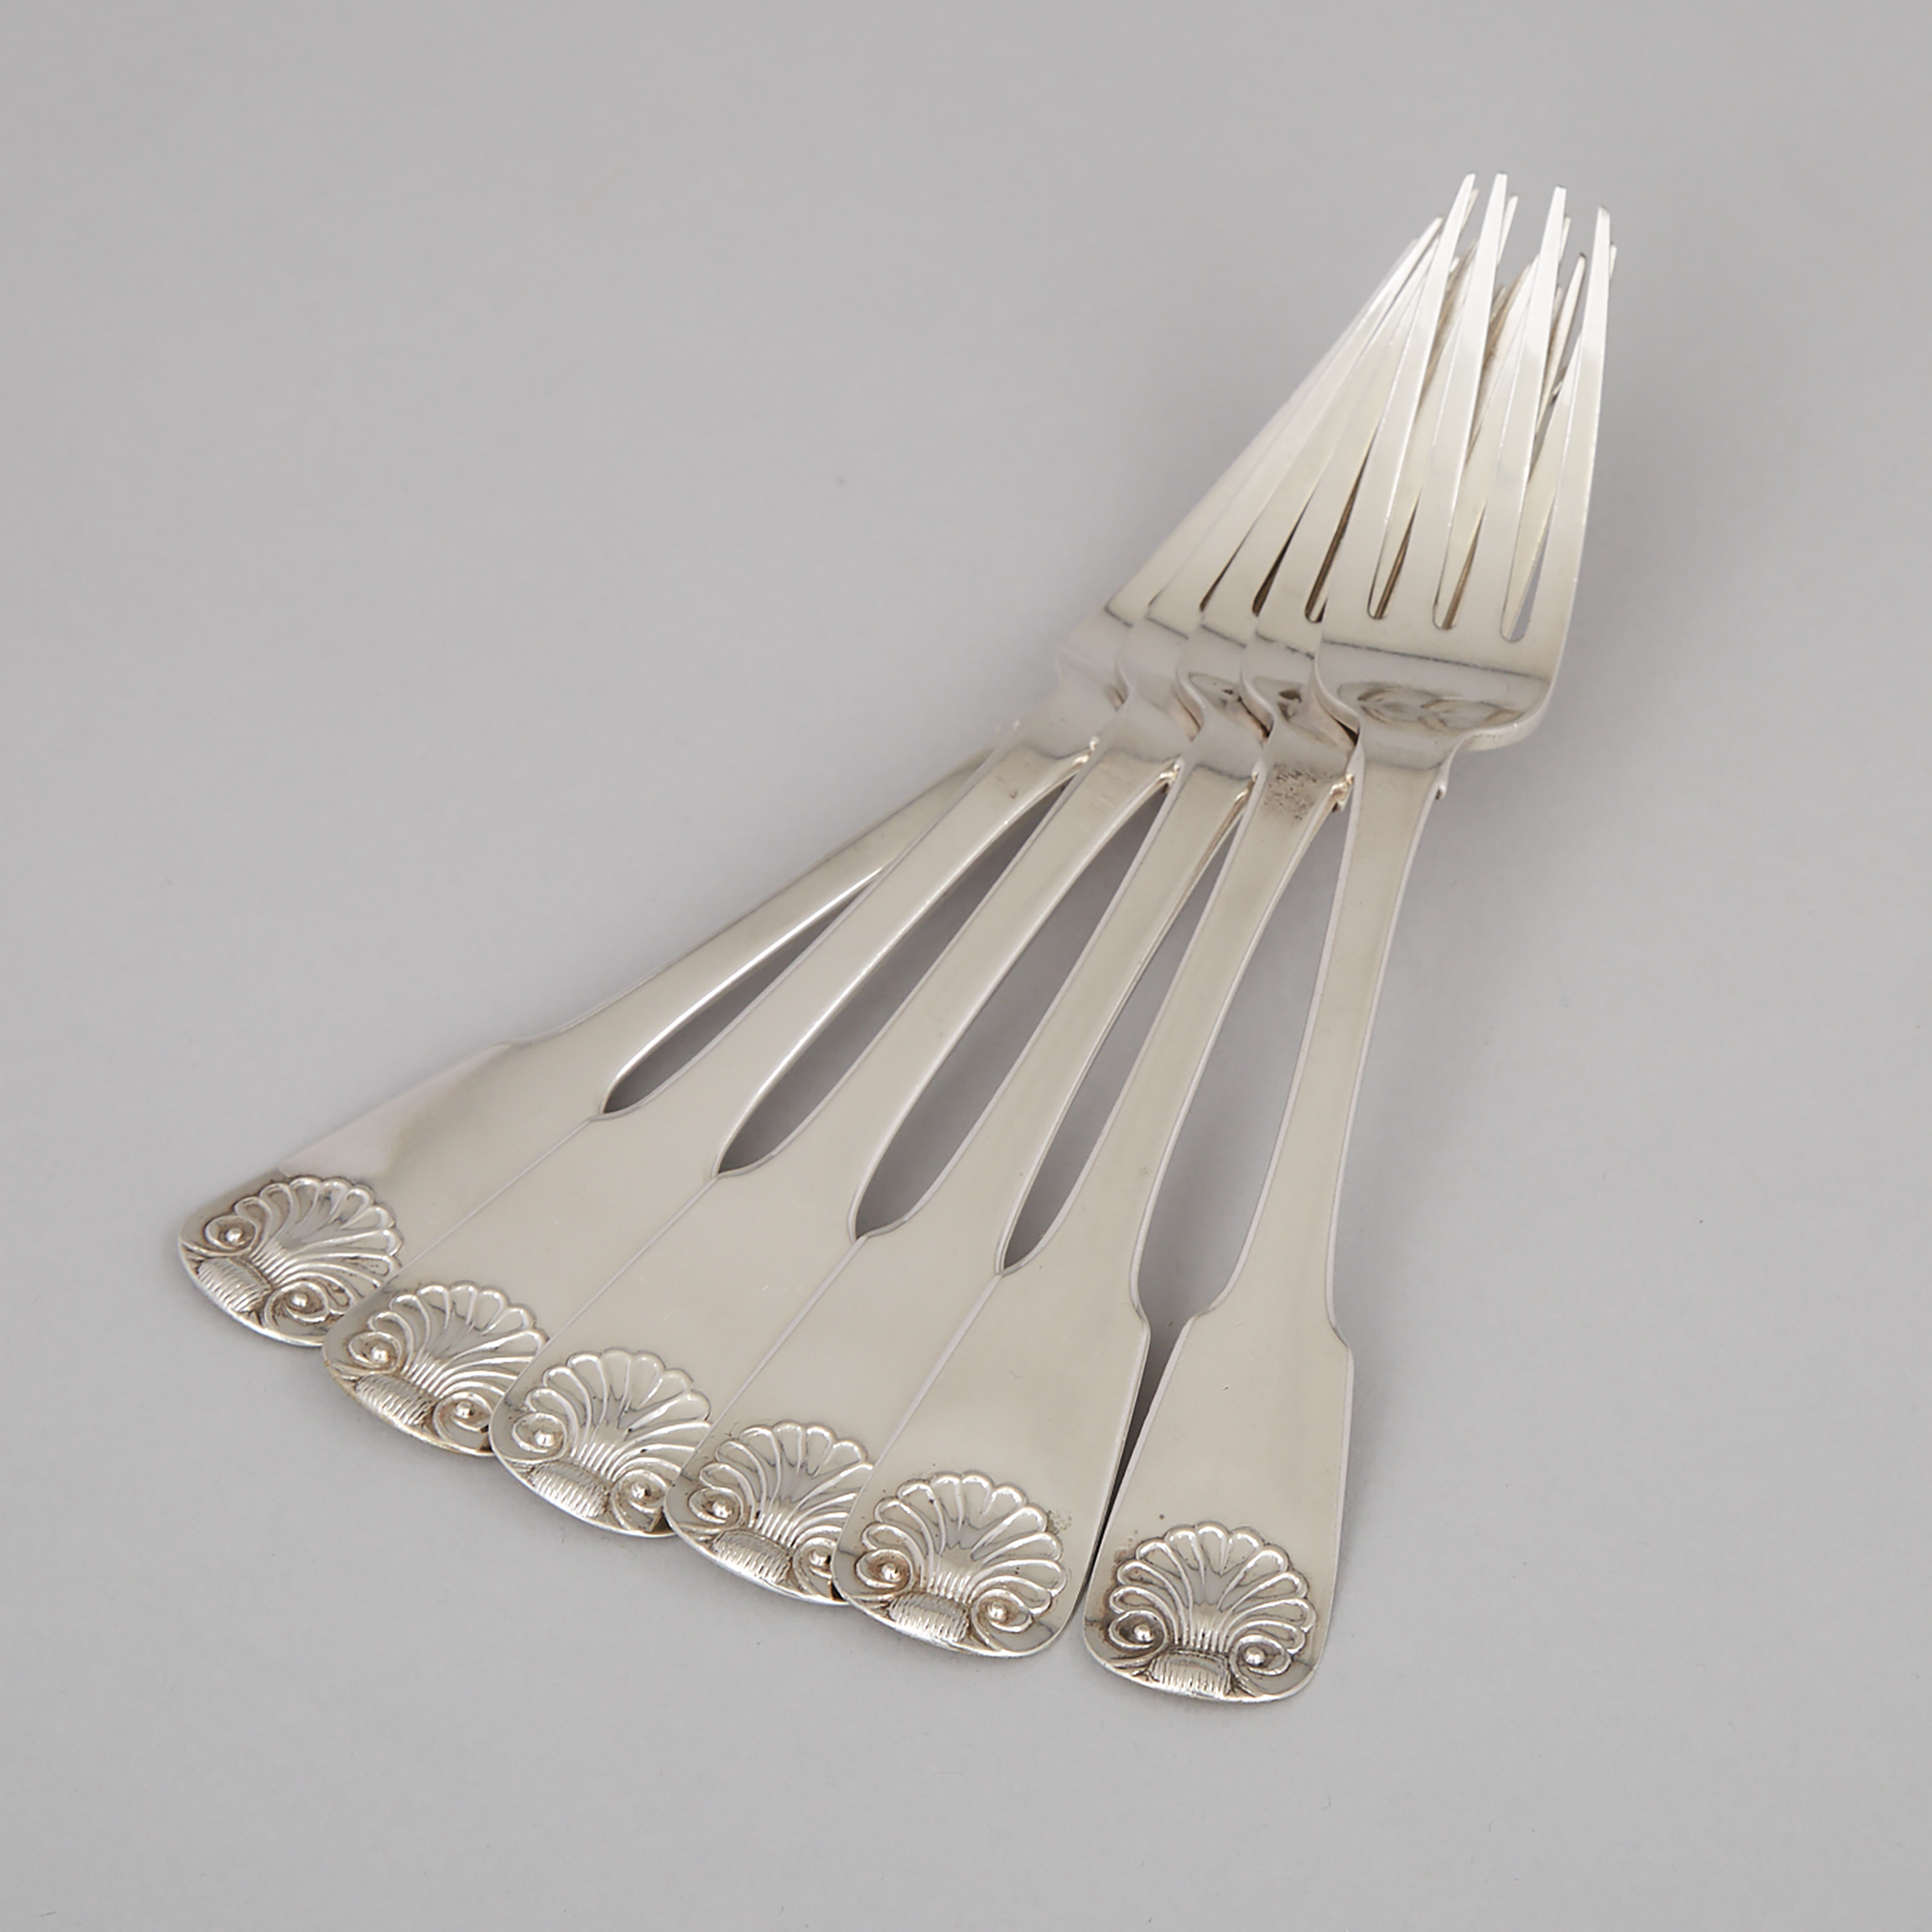 Six Canadian Silver Fiddle and Shell Pattern Table Forks, William Farquhar, Montreal, Que., c.1823-30